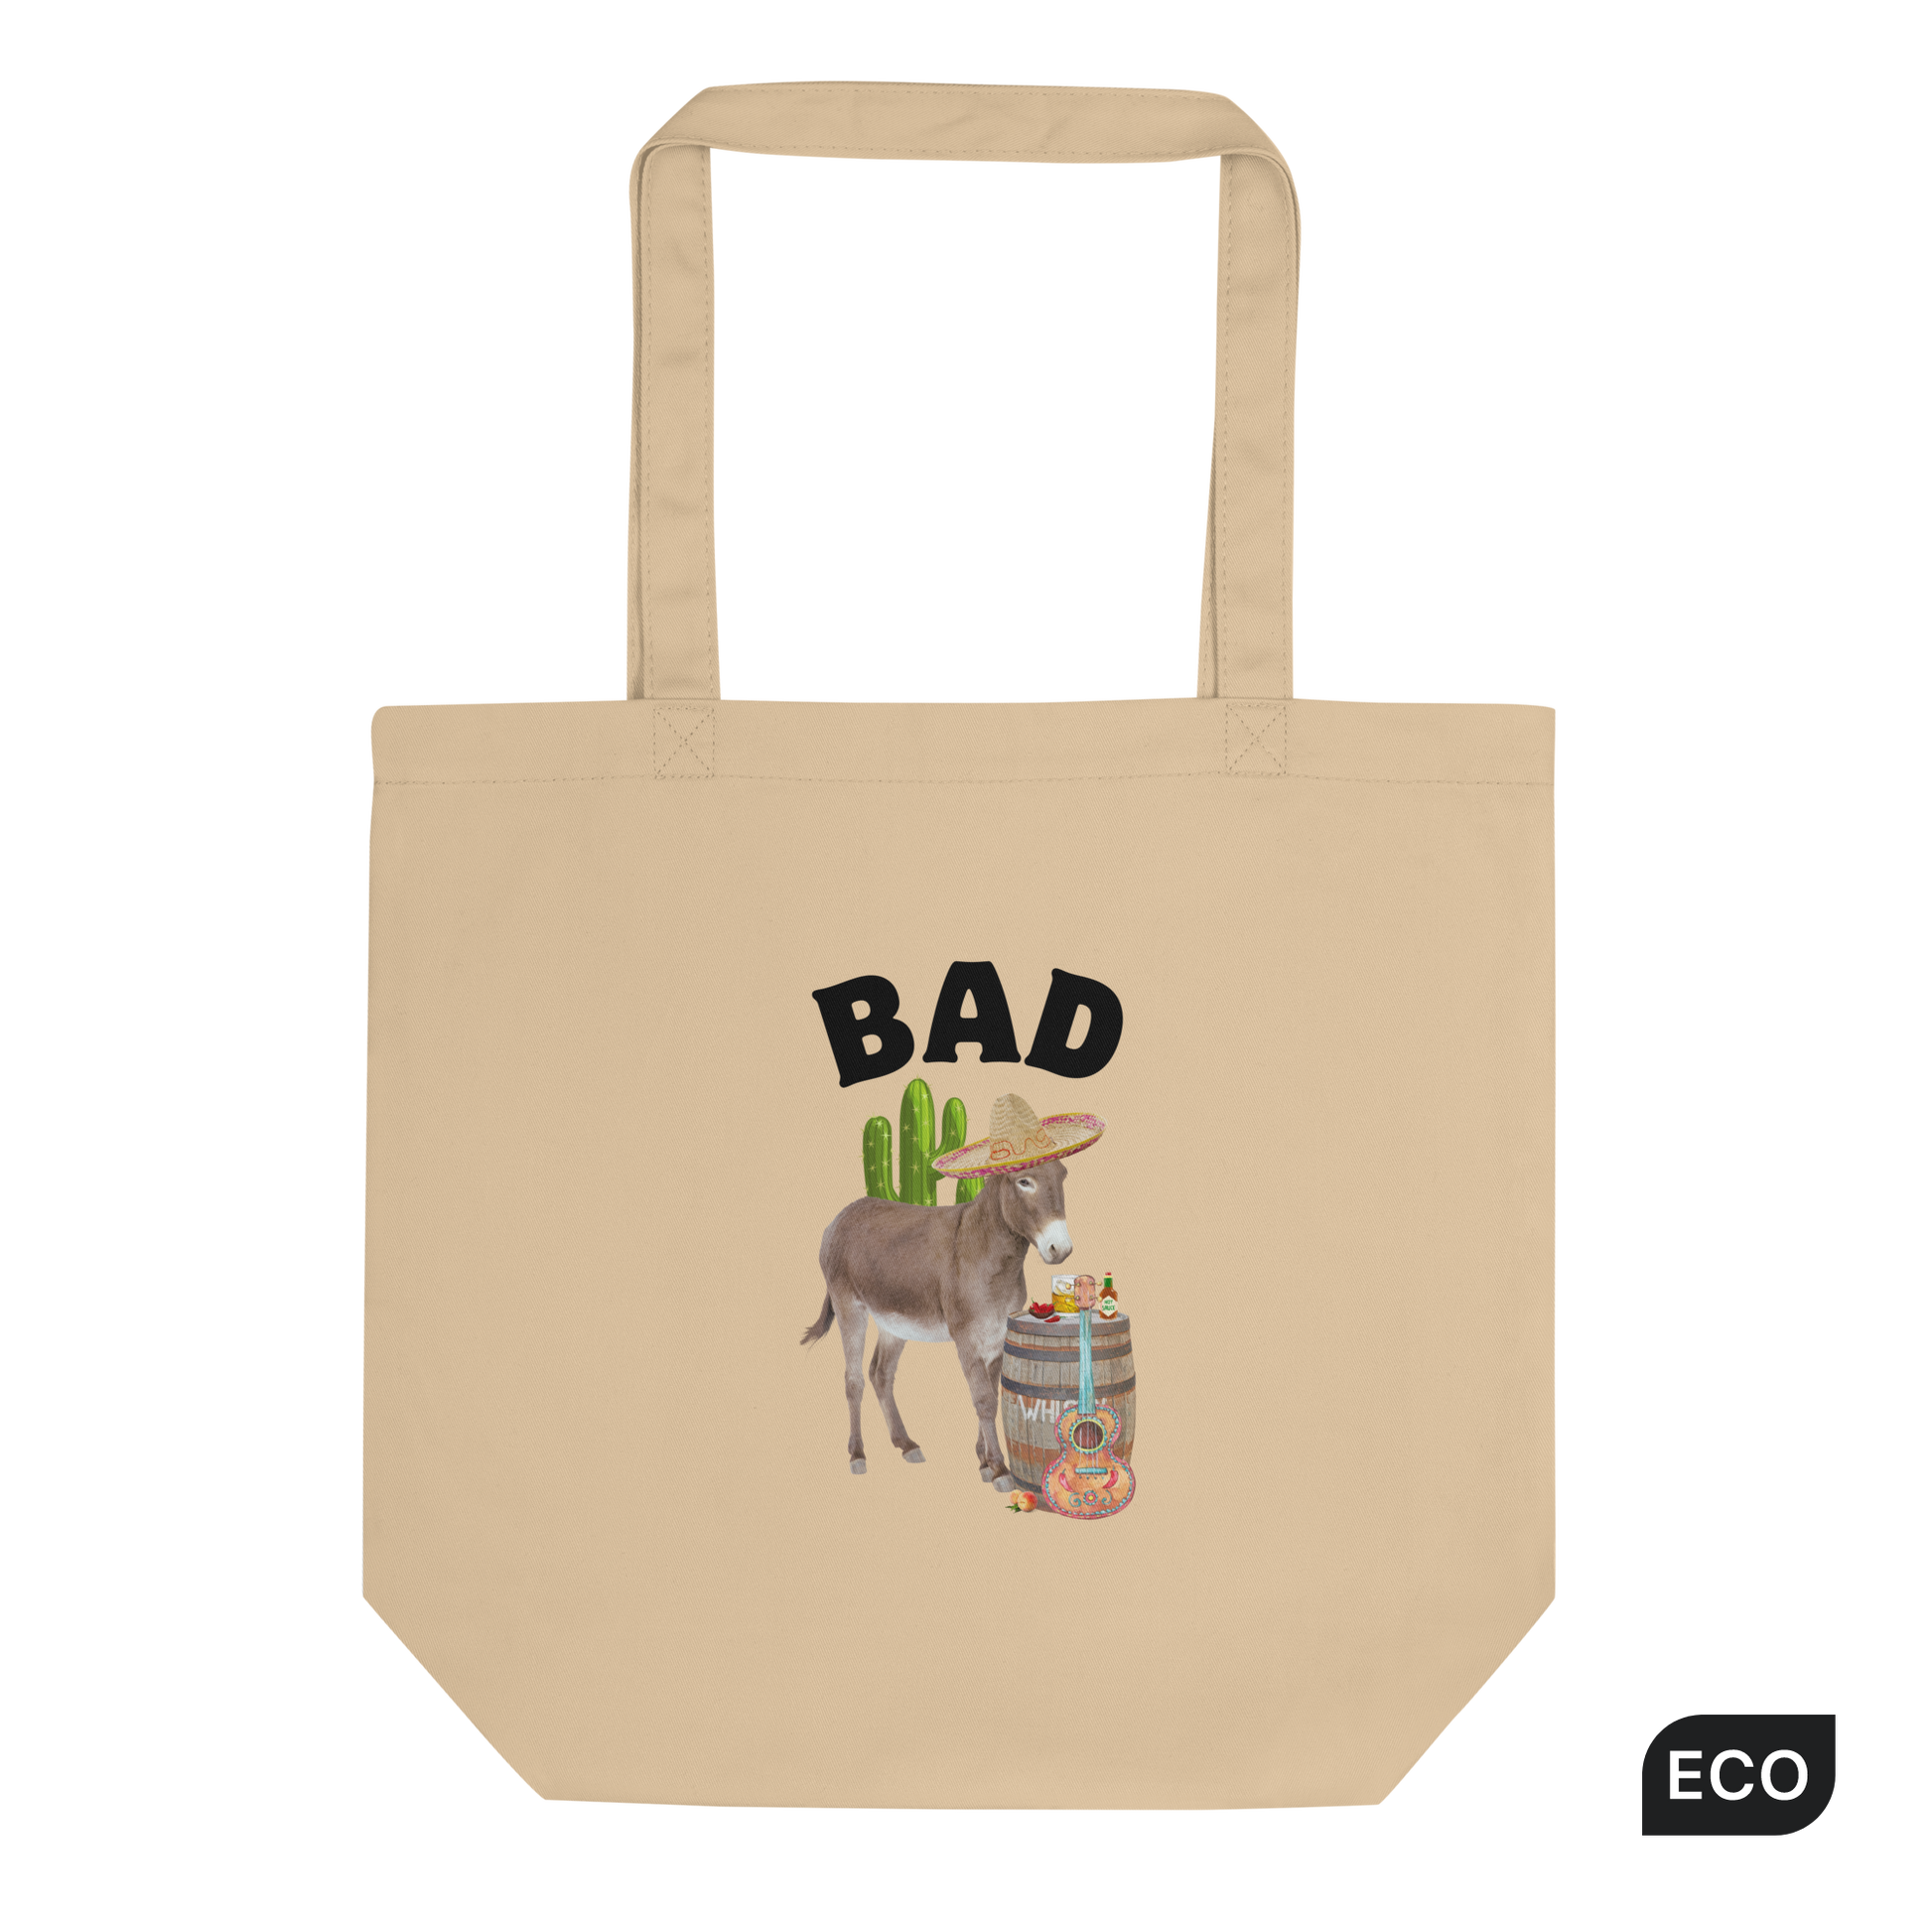 Oyster Colored Donkey Eco Tote Bag Featuring a Funny Bad Ass Donkey Graphic - Shop Funny Organic Cotton Tote Bags Online - Boozy Fox